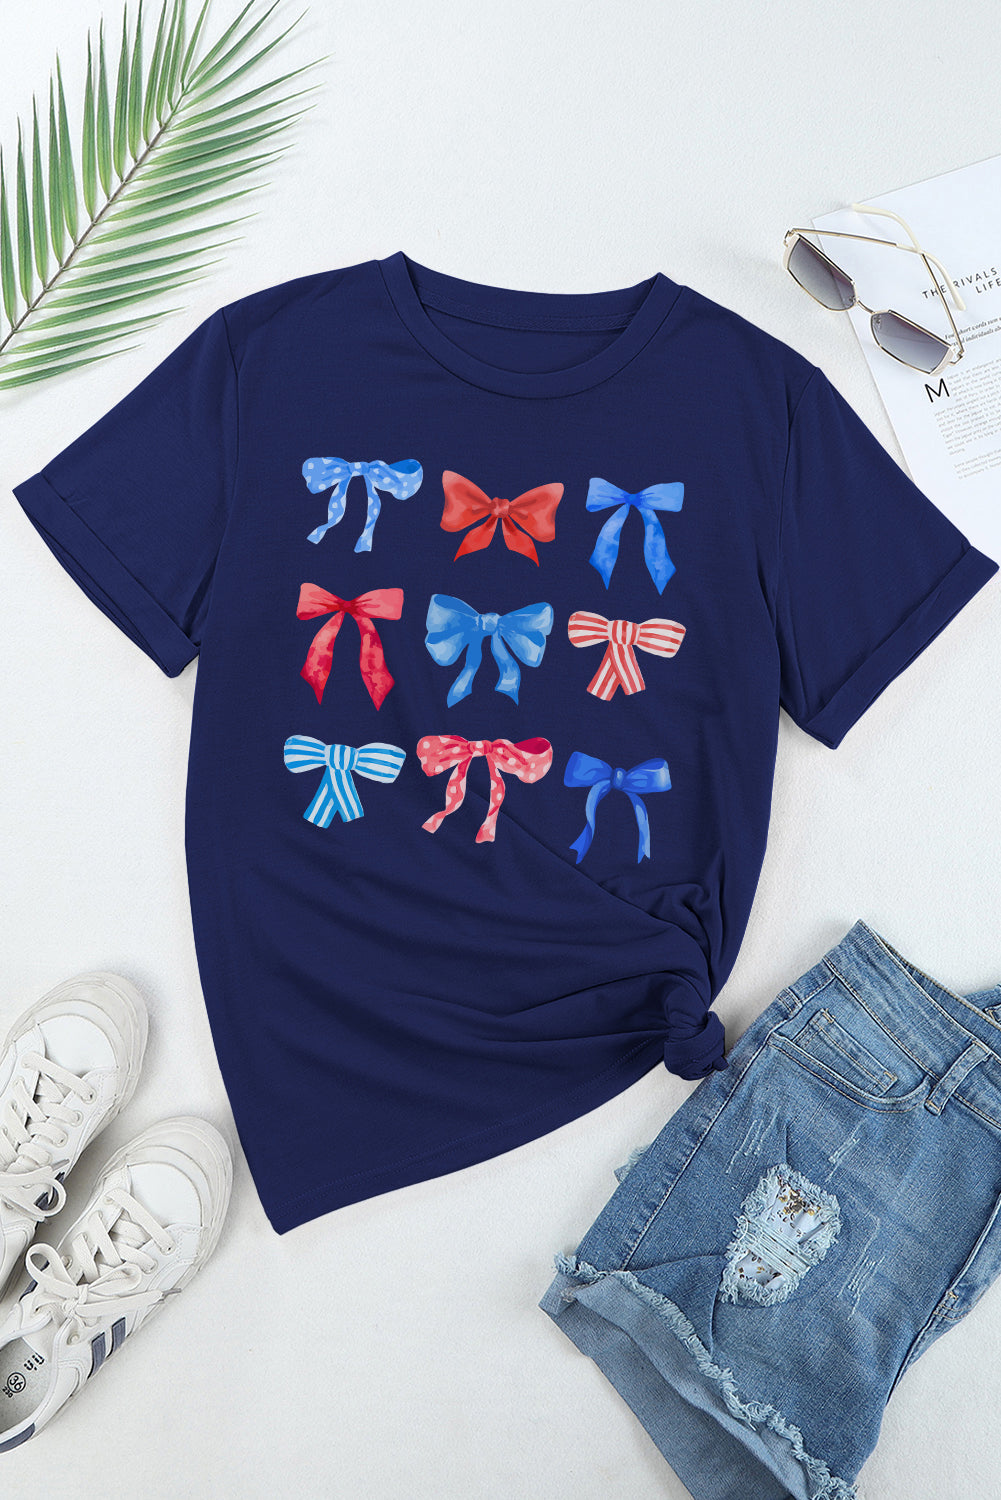 Blue Diverse Bowknot Print Independent Day Graphic Tee Graphic Tees JT's Designer Fashion